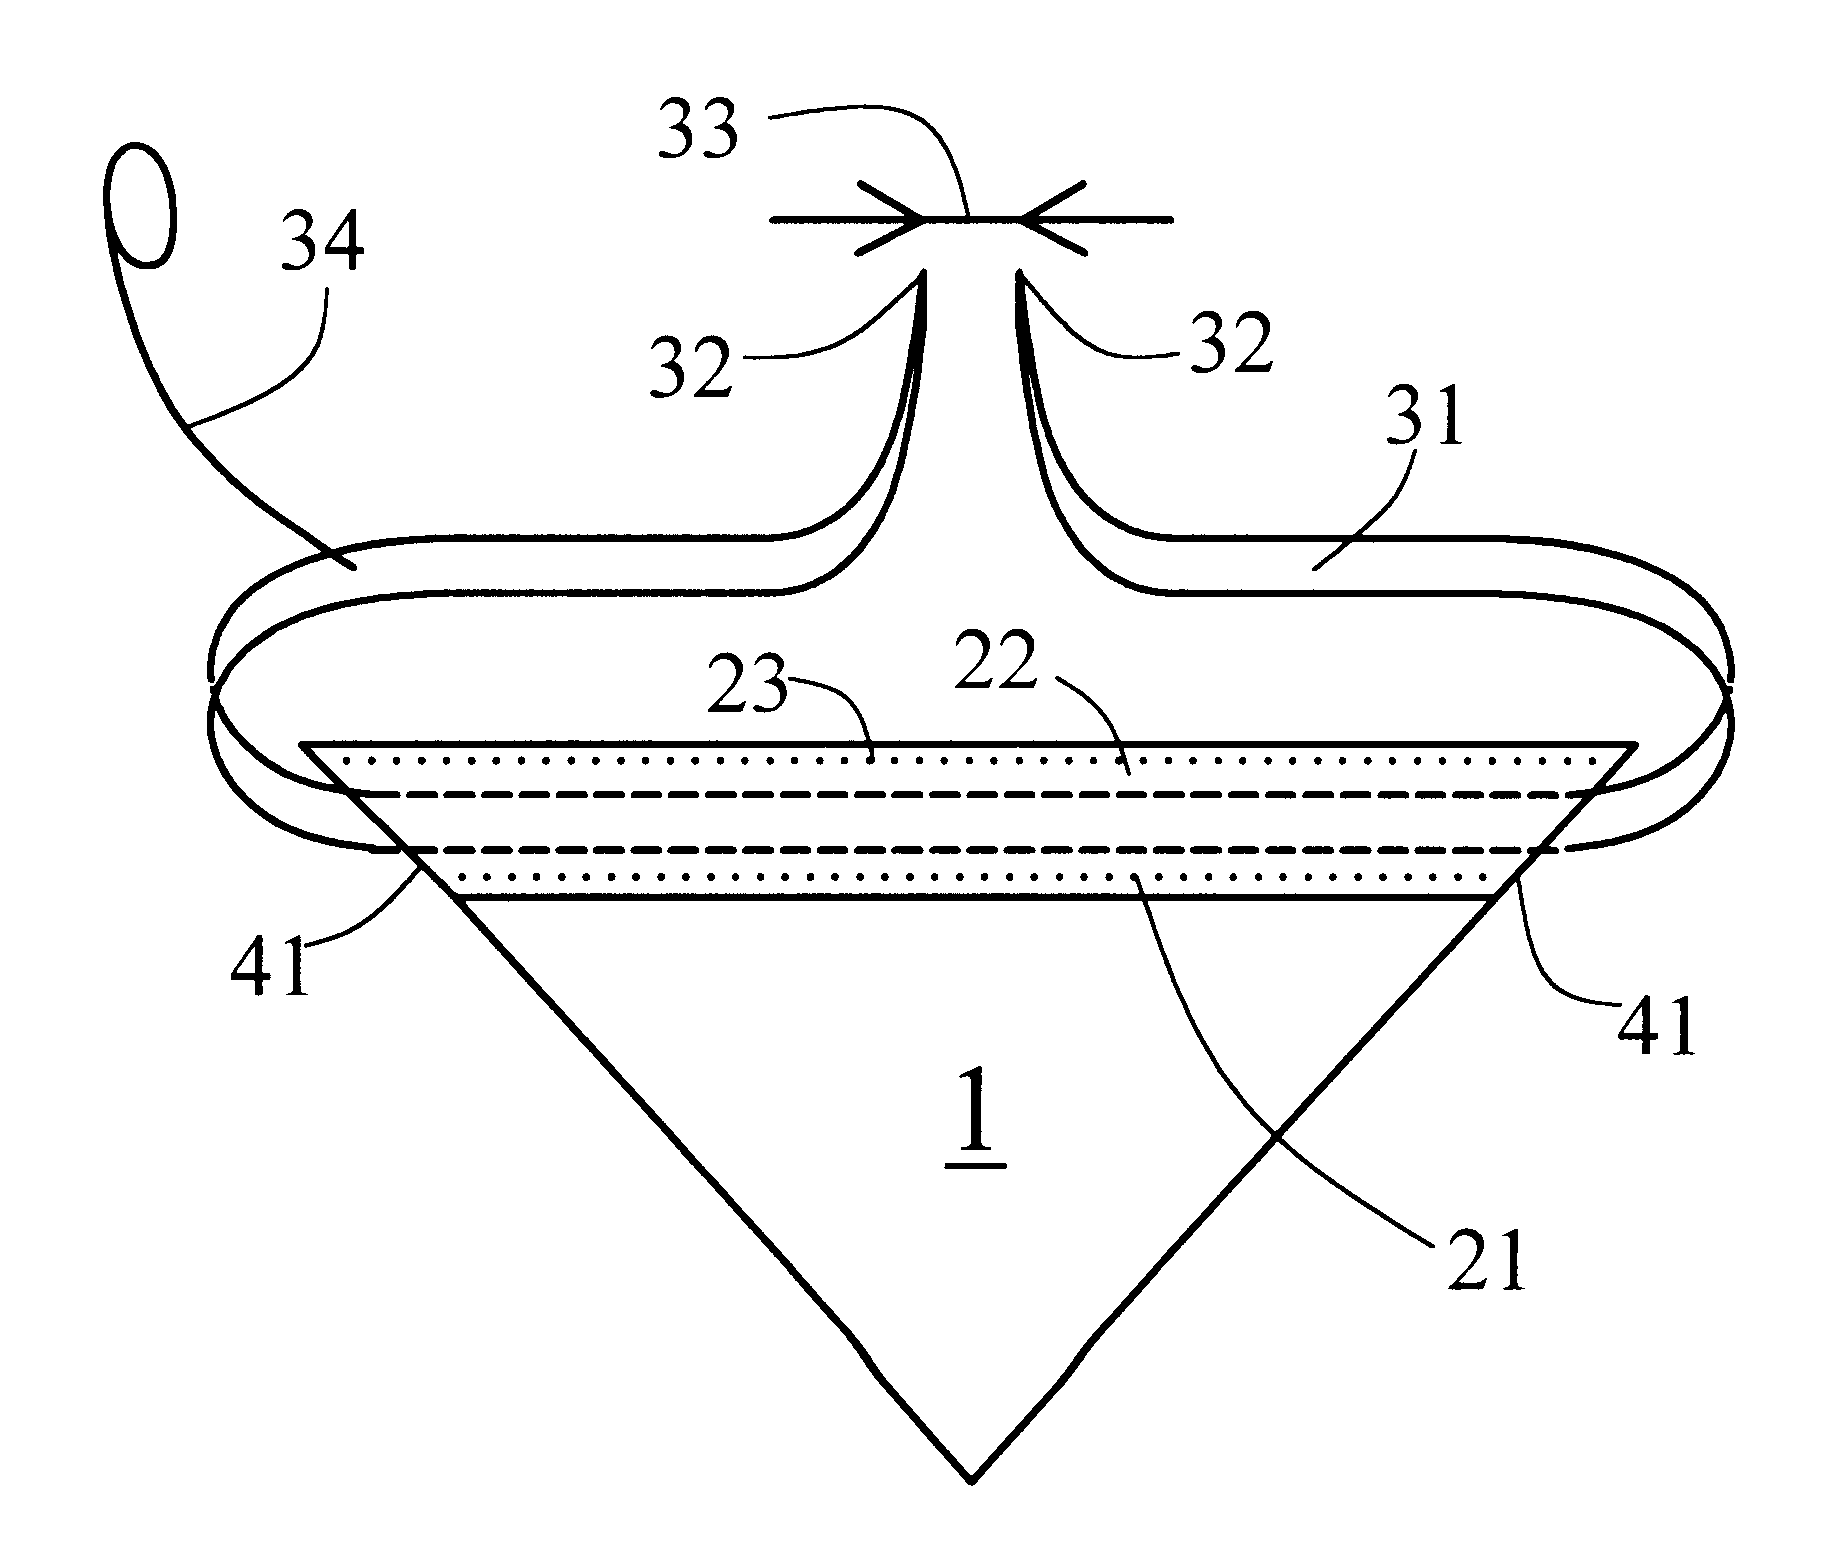 Bandanna and animal collar combination and method of manufacture